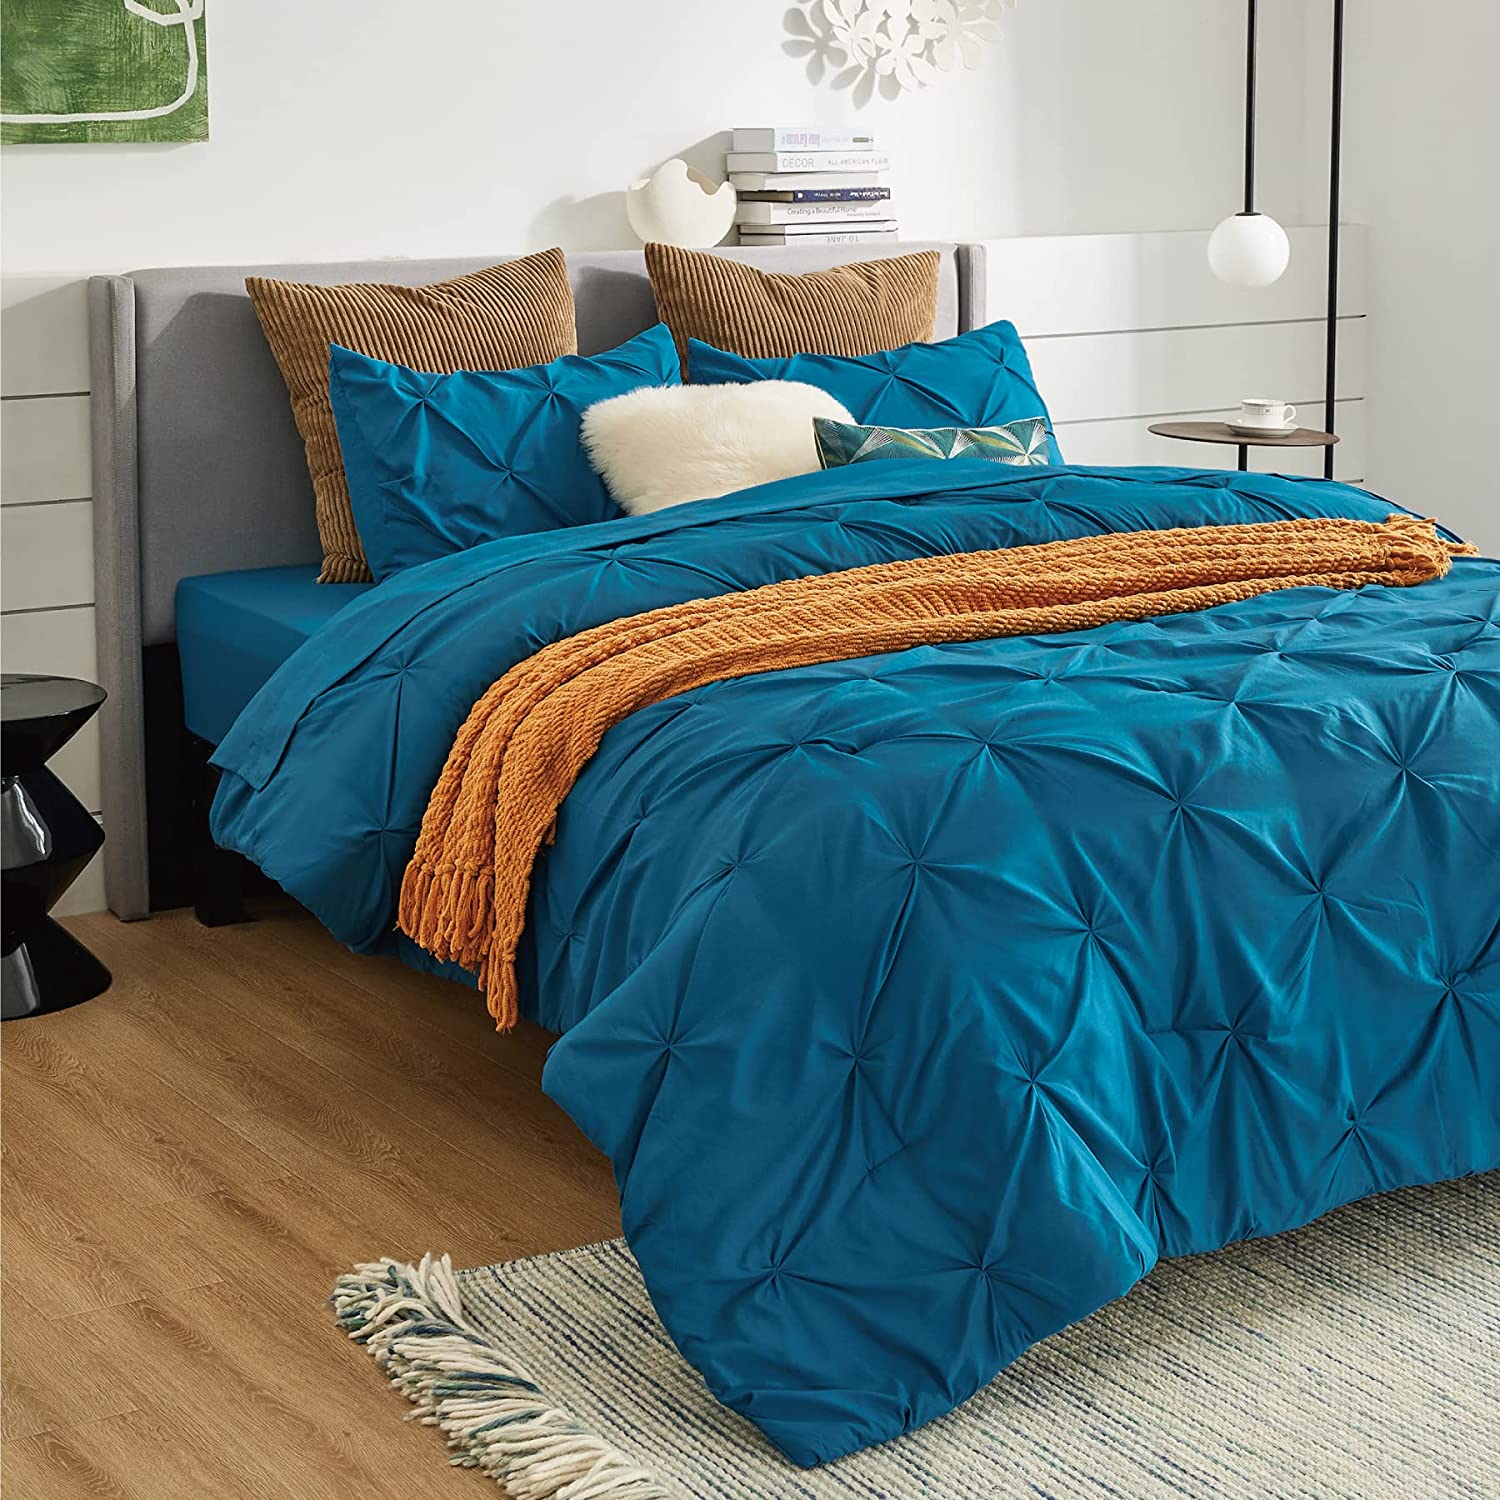 Price:$42.89 Bedsure Teal Duvet Cover Queen Size - Pinch Pleated Queen Size Duvet Cover with Zipper Closure, Microfiber Pintuck Duvet Cover(Teal, Queen) : Home & Kitchen